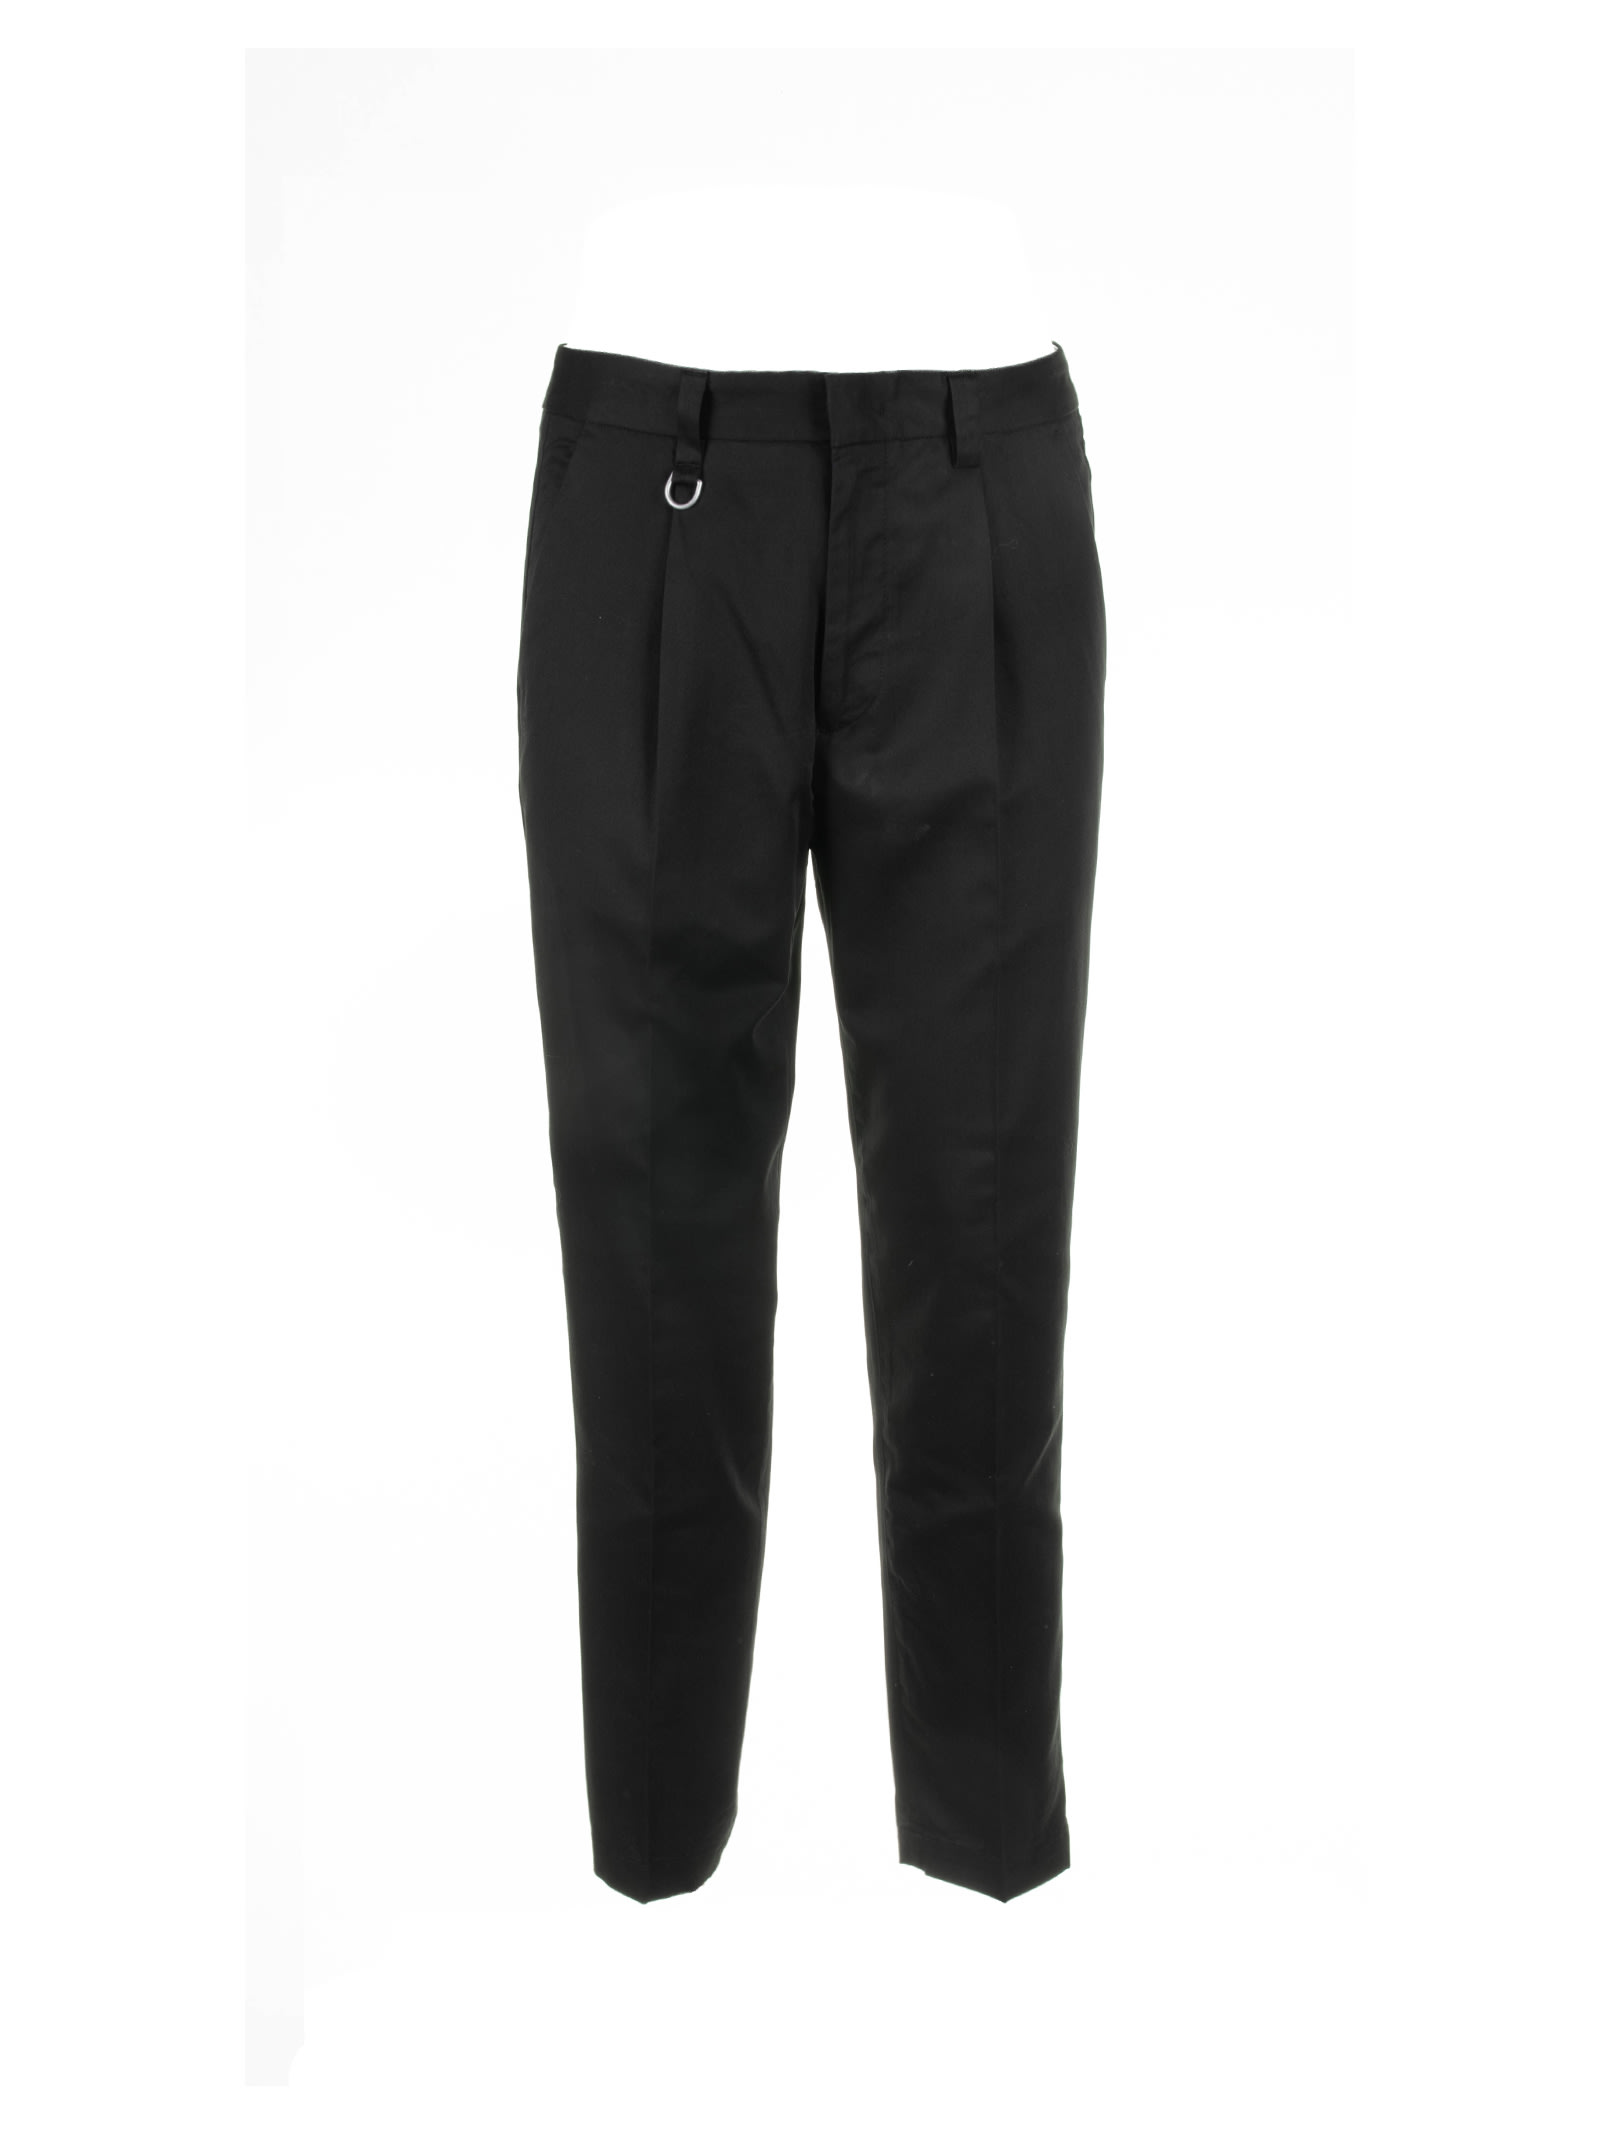 Black Trousers In Cotton And Linen Blend